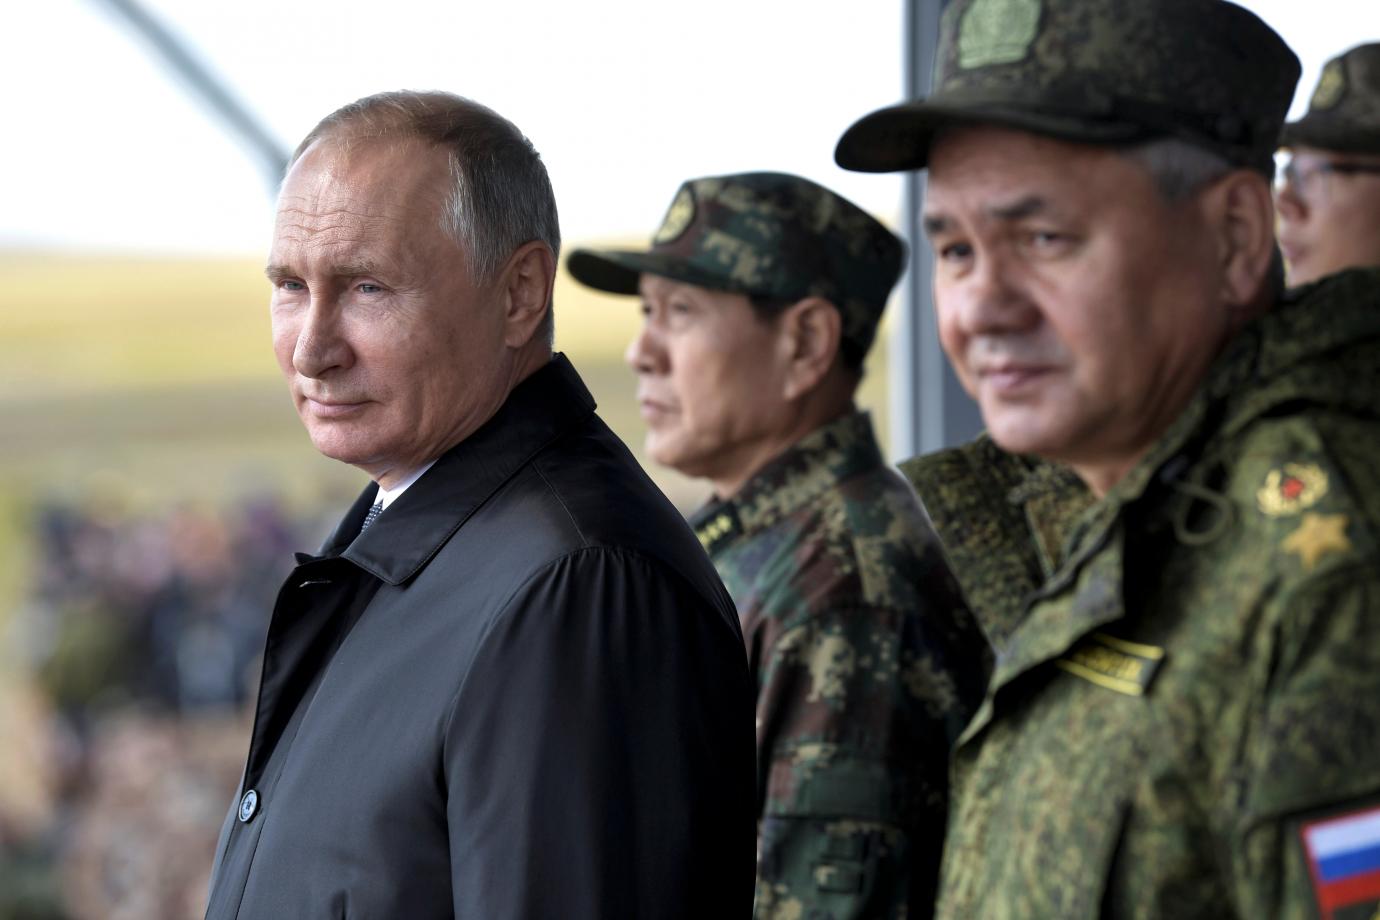 The Return of Doomsday: Vladimir Putin and his Defense Minister Sergei Shoigu stand by Chinese Defense Minister Wei Fenghe during a military parade, 2018. Sputnik / Alexei Nikolsky / Kremlin via Reuters